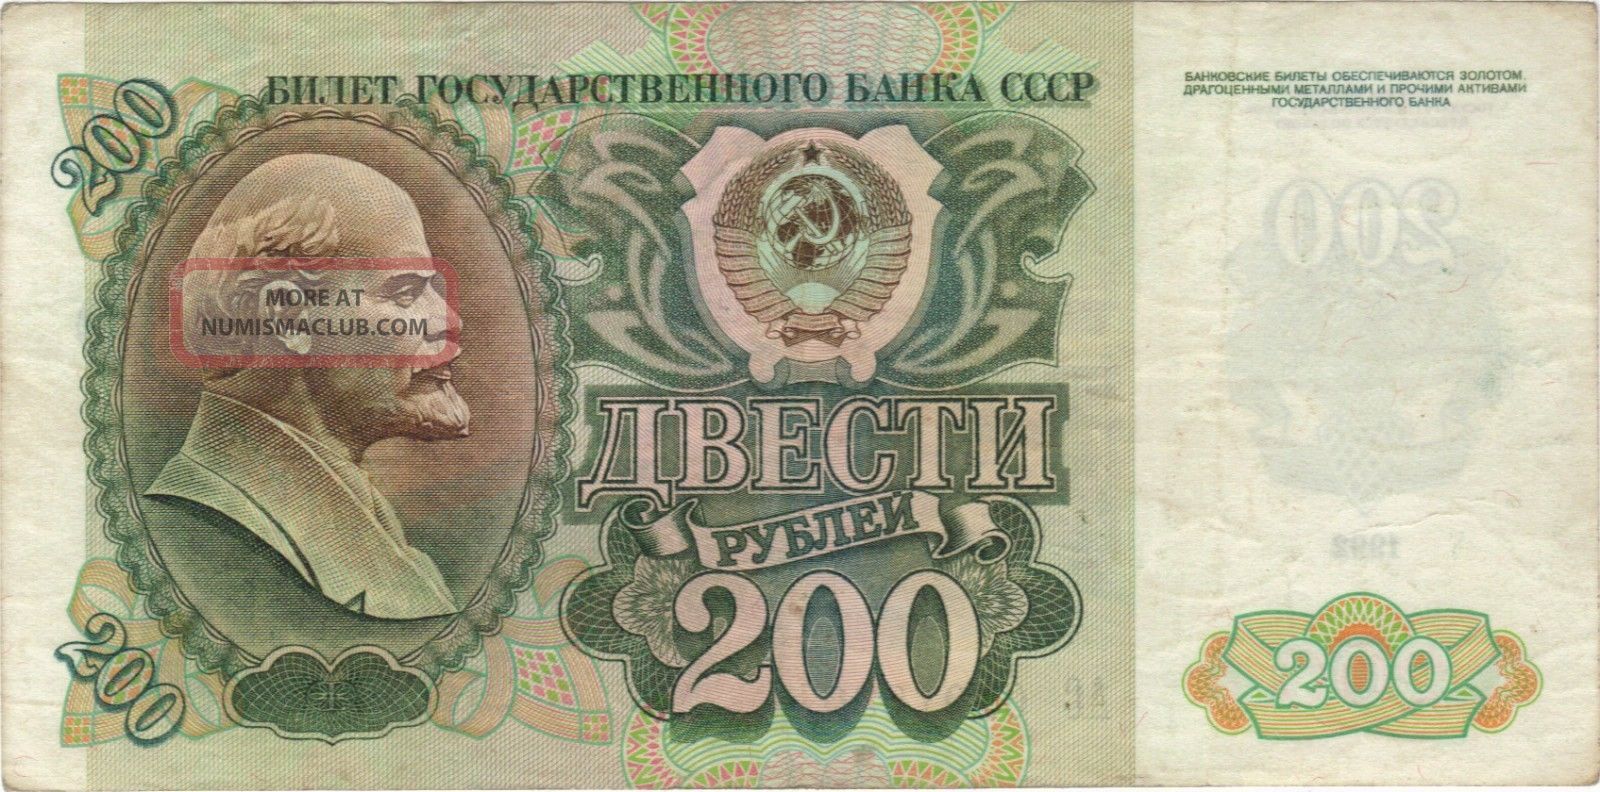 1992 200 Rubles Lenin Russia Currency Banknote Note Money Bill Cash Ussr Russian Europe photo